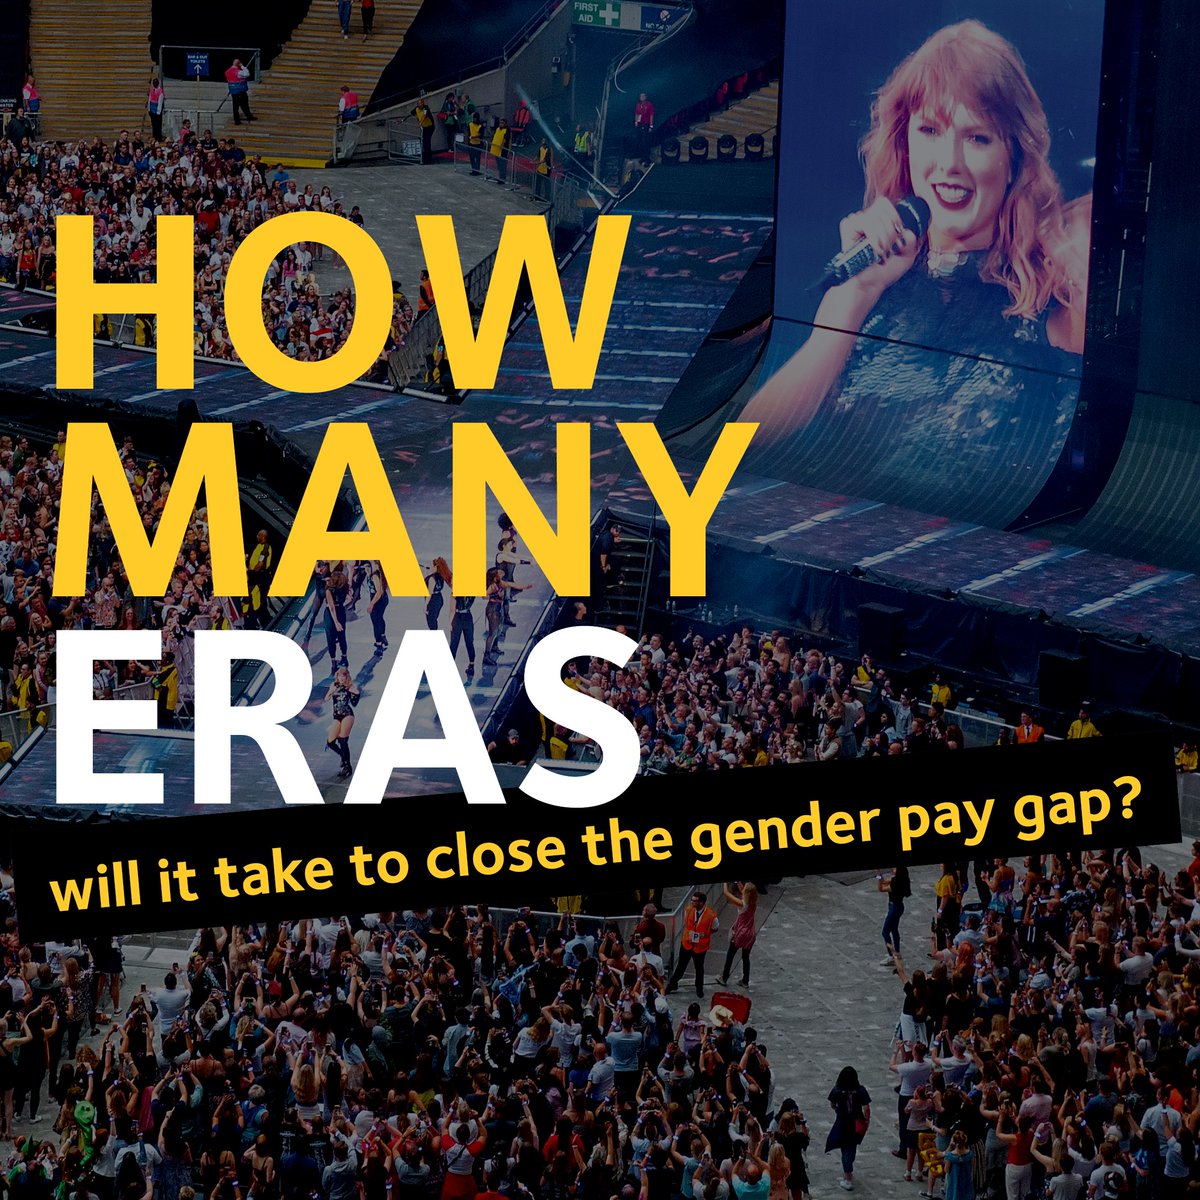 Taylor Swift’s Eras tour has broken barriers in the music industry. Publishing gender pay gaps on 27 February will break barriers for transparency and accountability in workplace gender equality. It’s time to end the era of inequality. wgea.gov.au/about/our-legi…